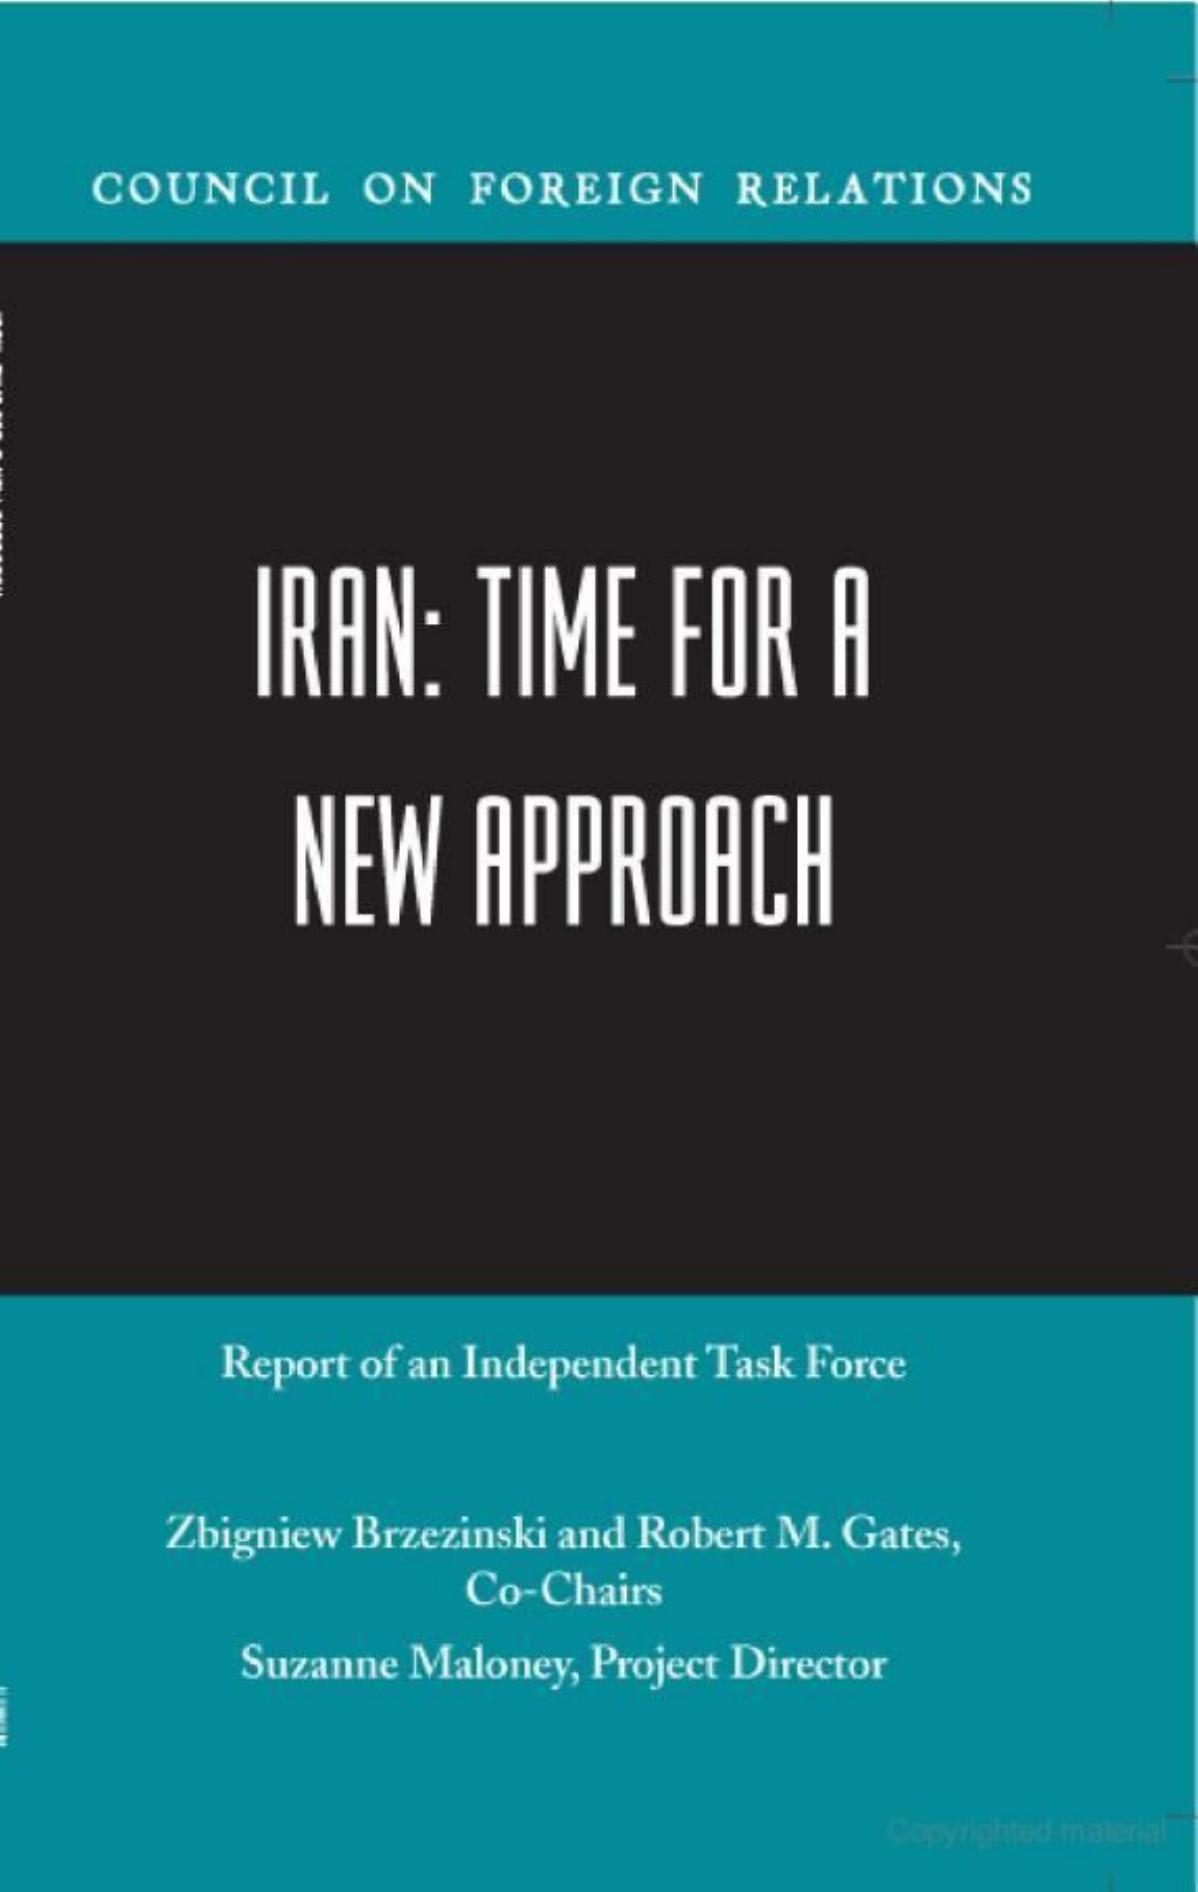 Iran: Time for a New Approach : Report of an Independent Task Force Sponsored by the Council on Foreign Relations